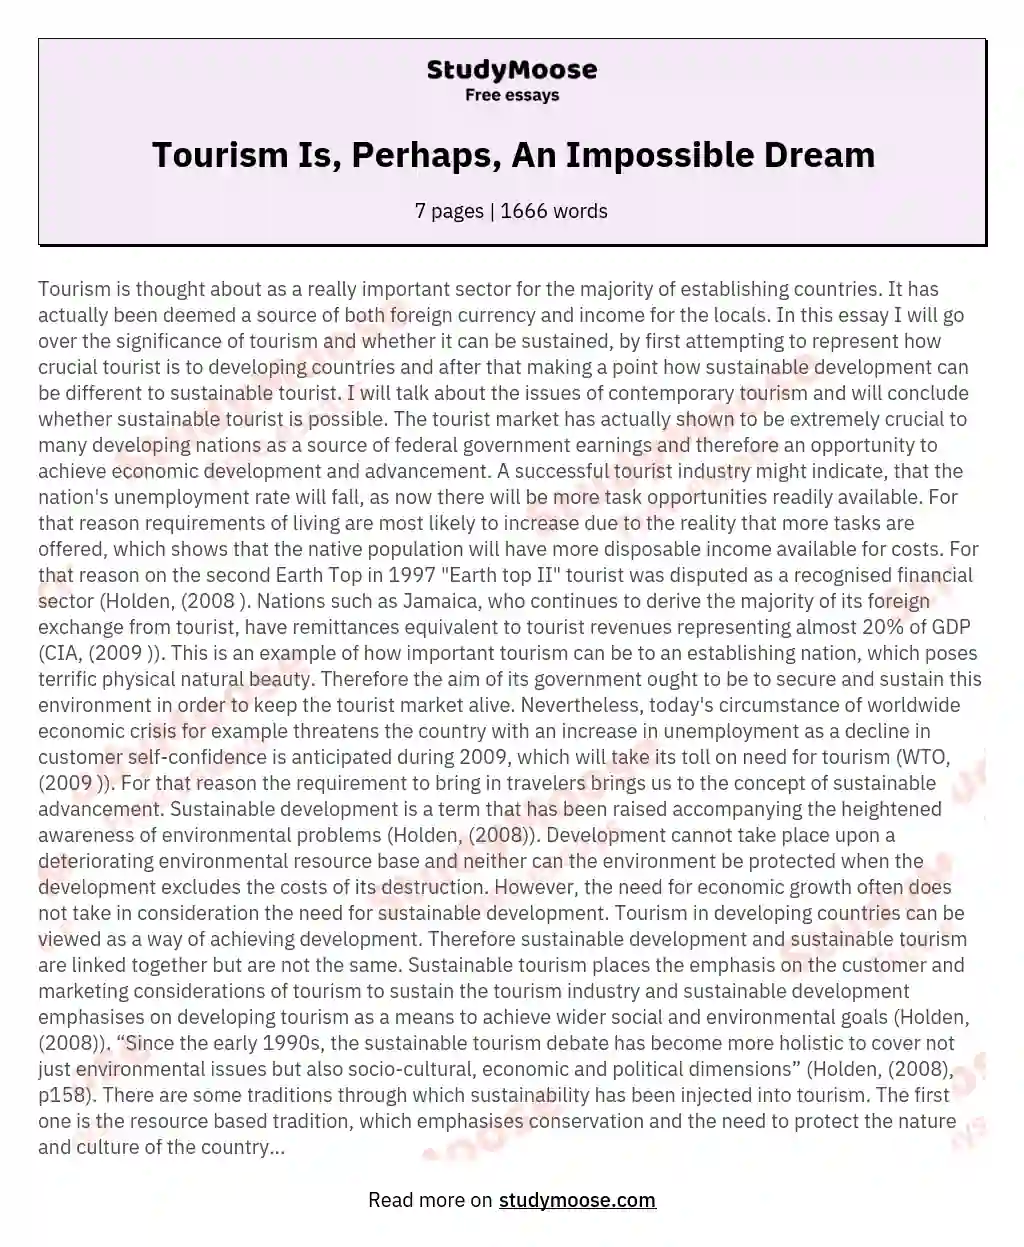 Tourism Is, Perhaps, An Impossible Dream